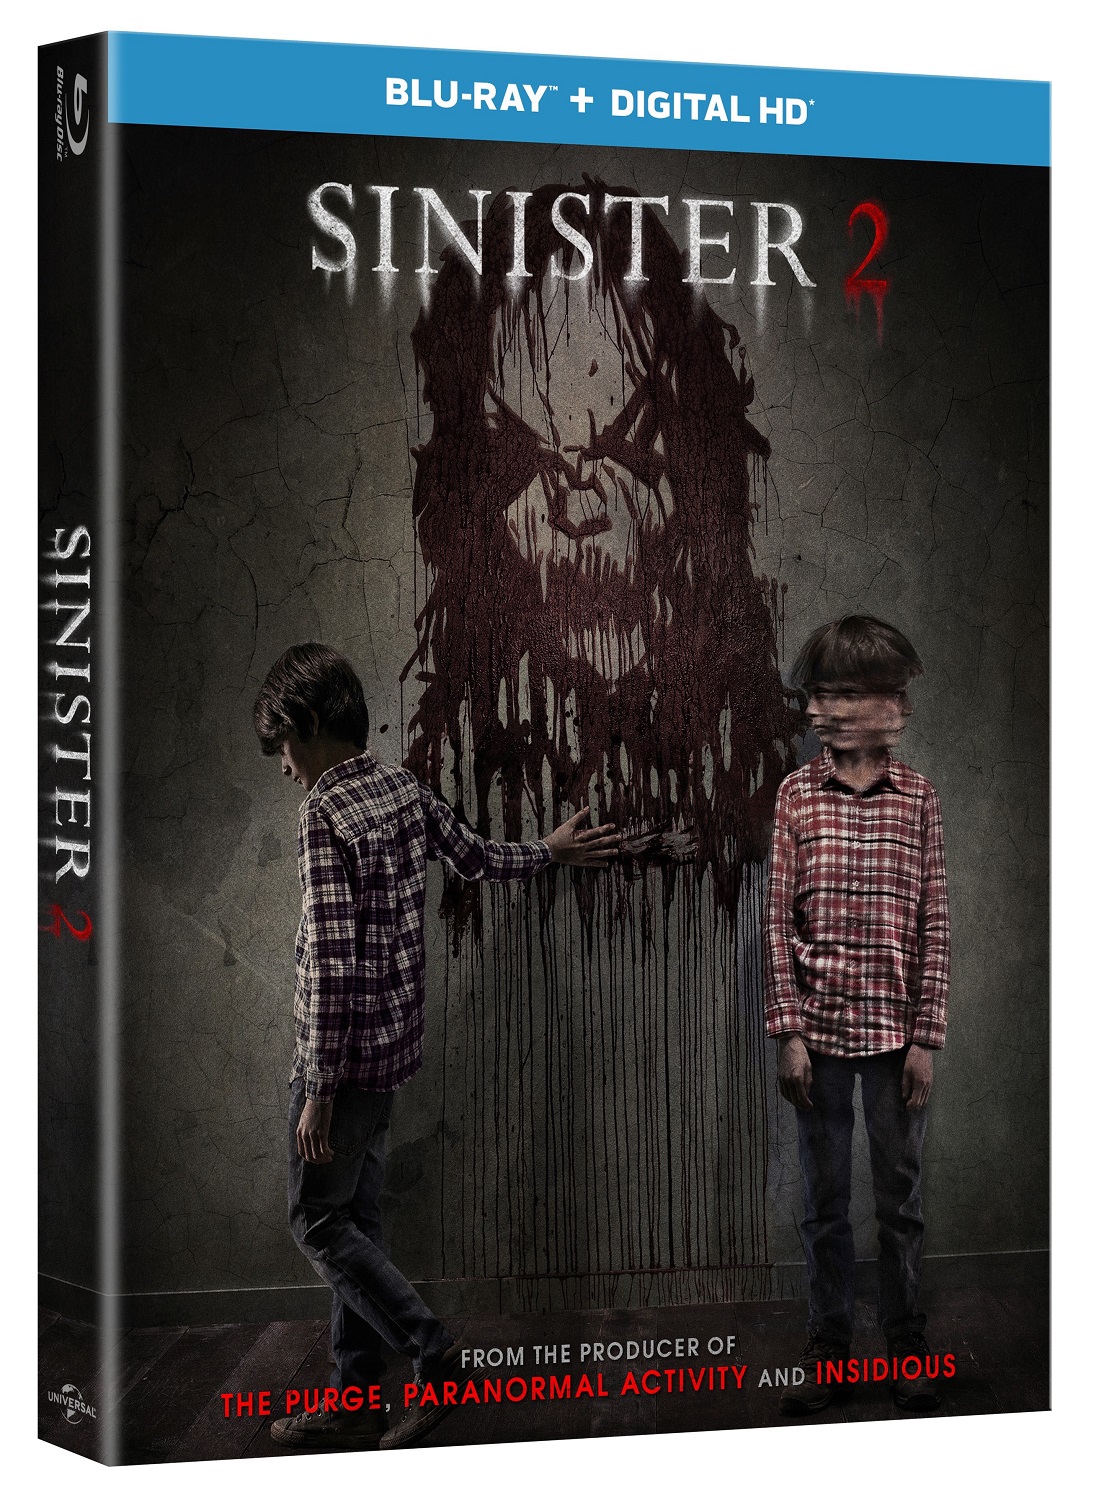 Sinister 2 Coming Soon To Digital HD & Blu-ray